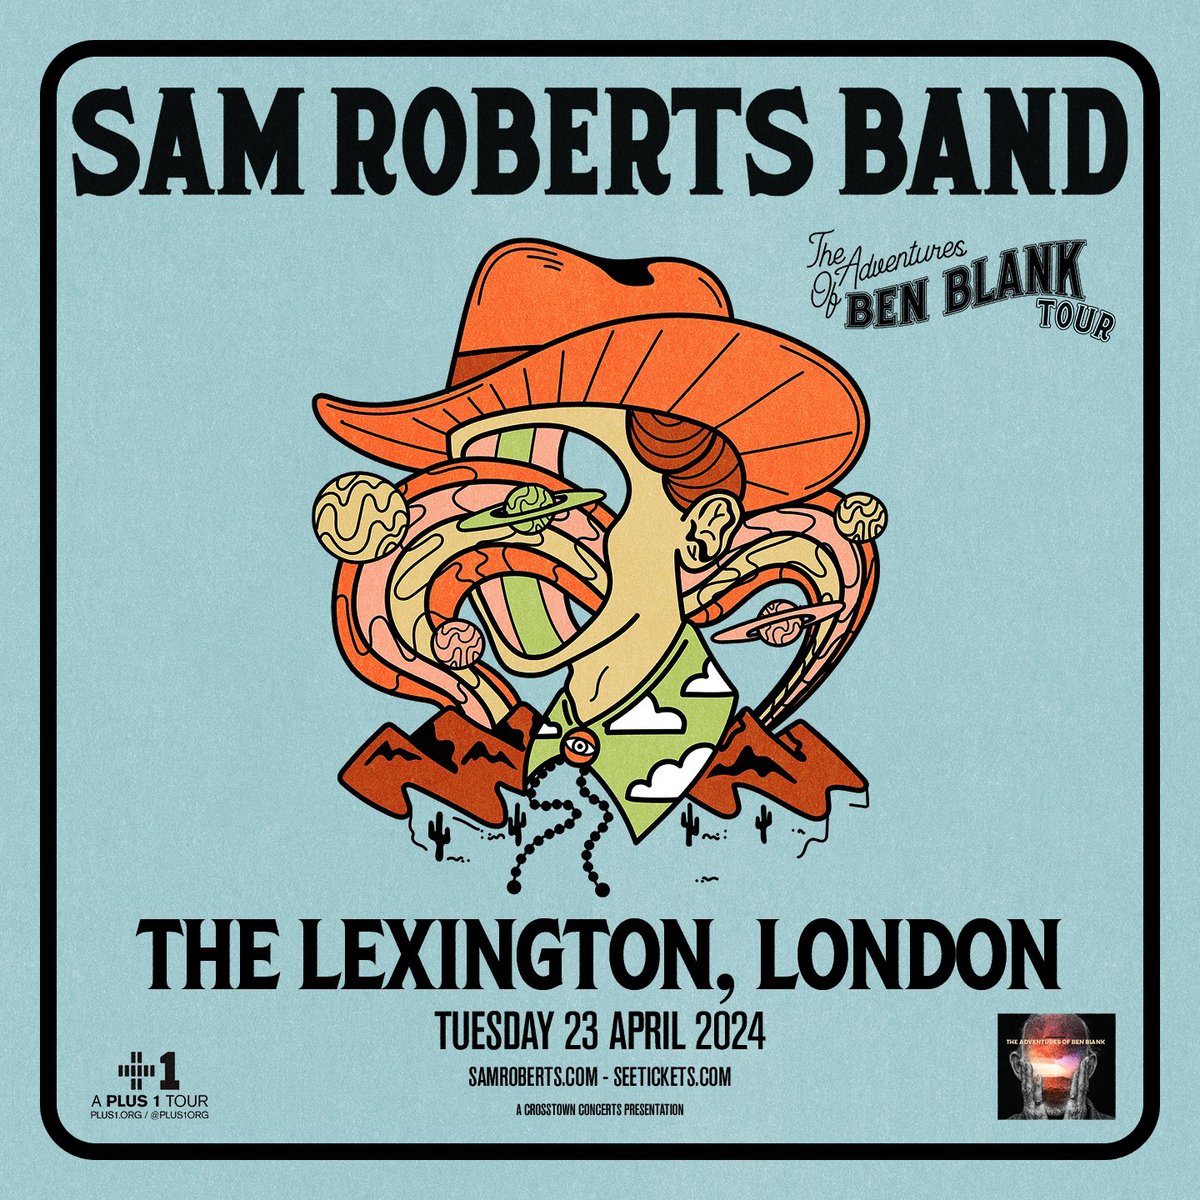 Back in London for the Ben Blank tour, we play @thelexington April 23 🇬🇧